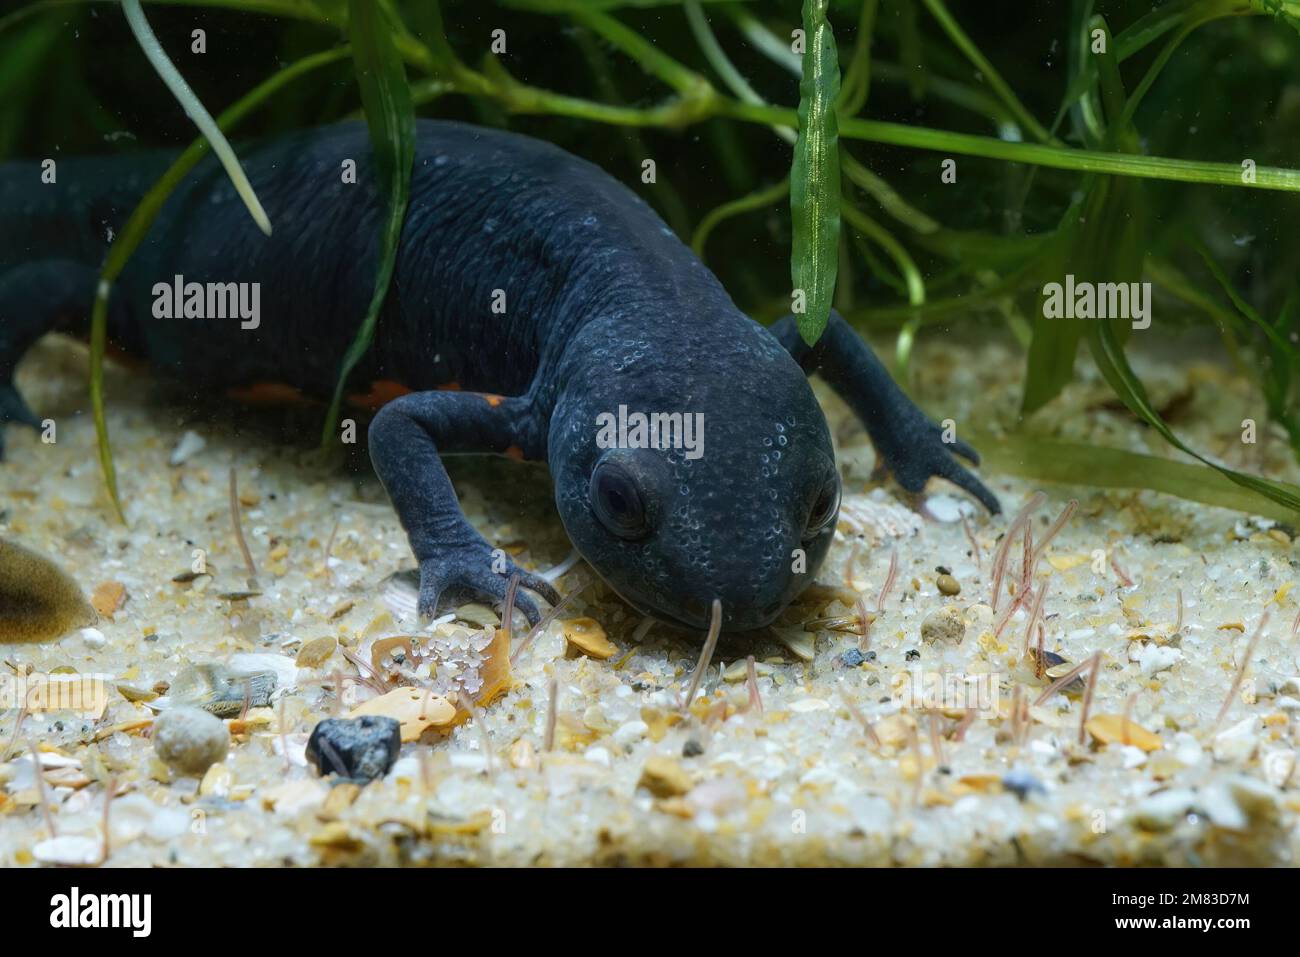 Closeup on an aquatic adult female Chinese fire-bellied newt, Cynops orientalis , underwater feeding on tubifex Stock Photo